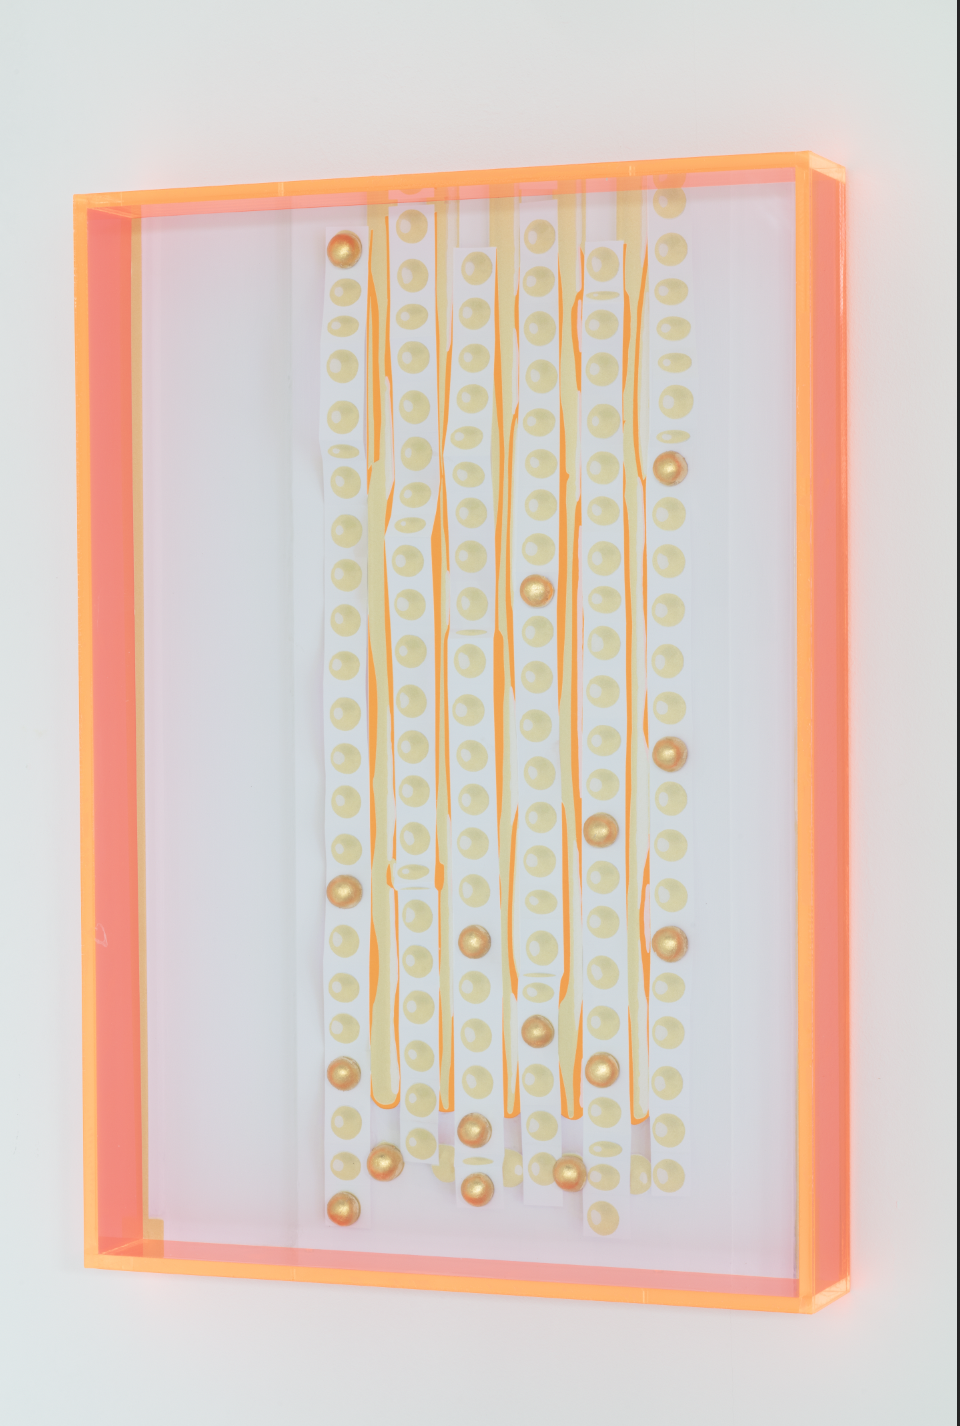 Photoworks + Objects (2011-2022) - Going Round and Round no. 1 Silkscreen combined with...